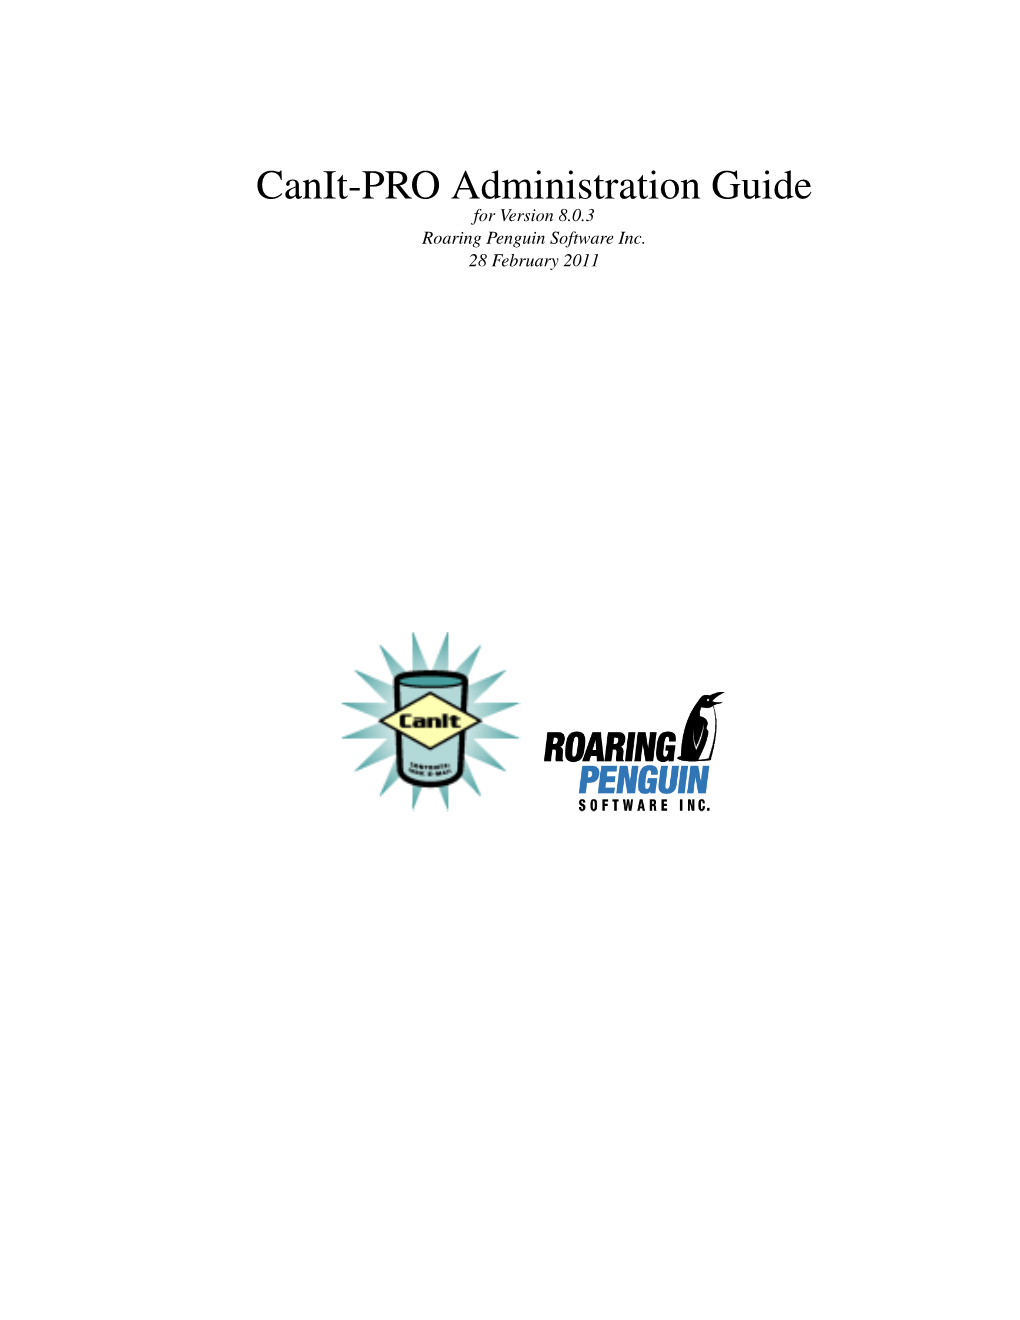 Canit-PRO Administration Guide for Version 8.0.3 Roaring Penguin Software Inc